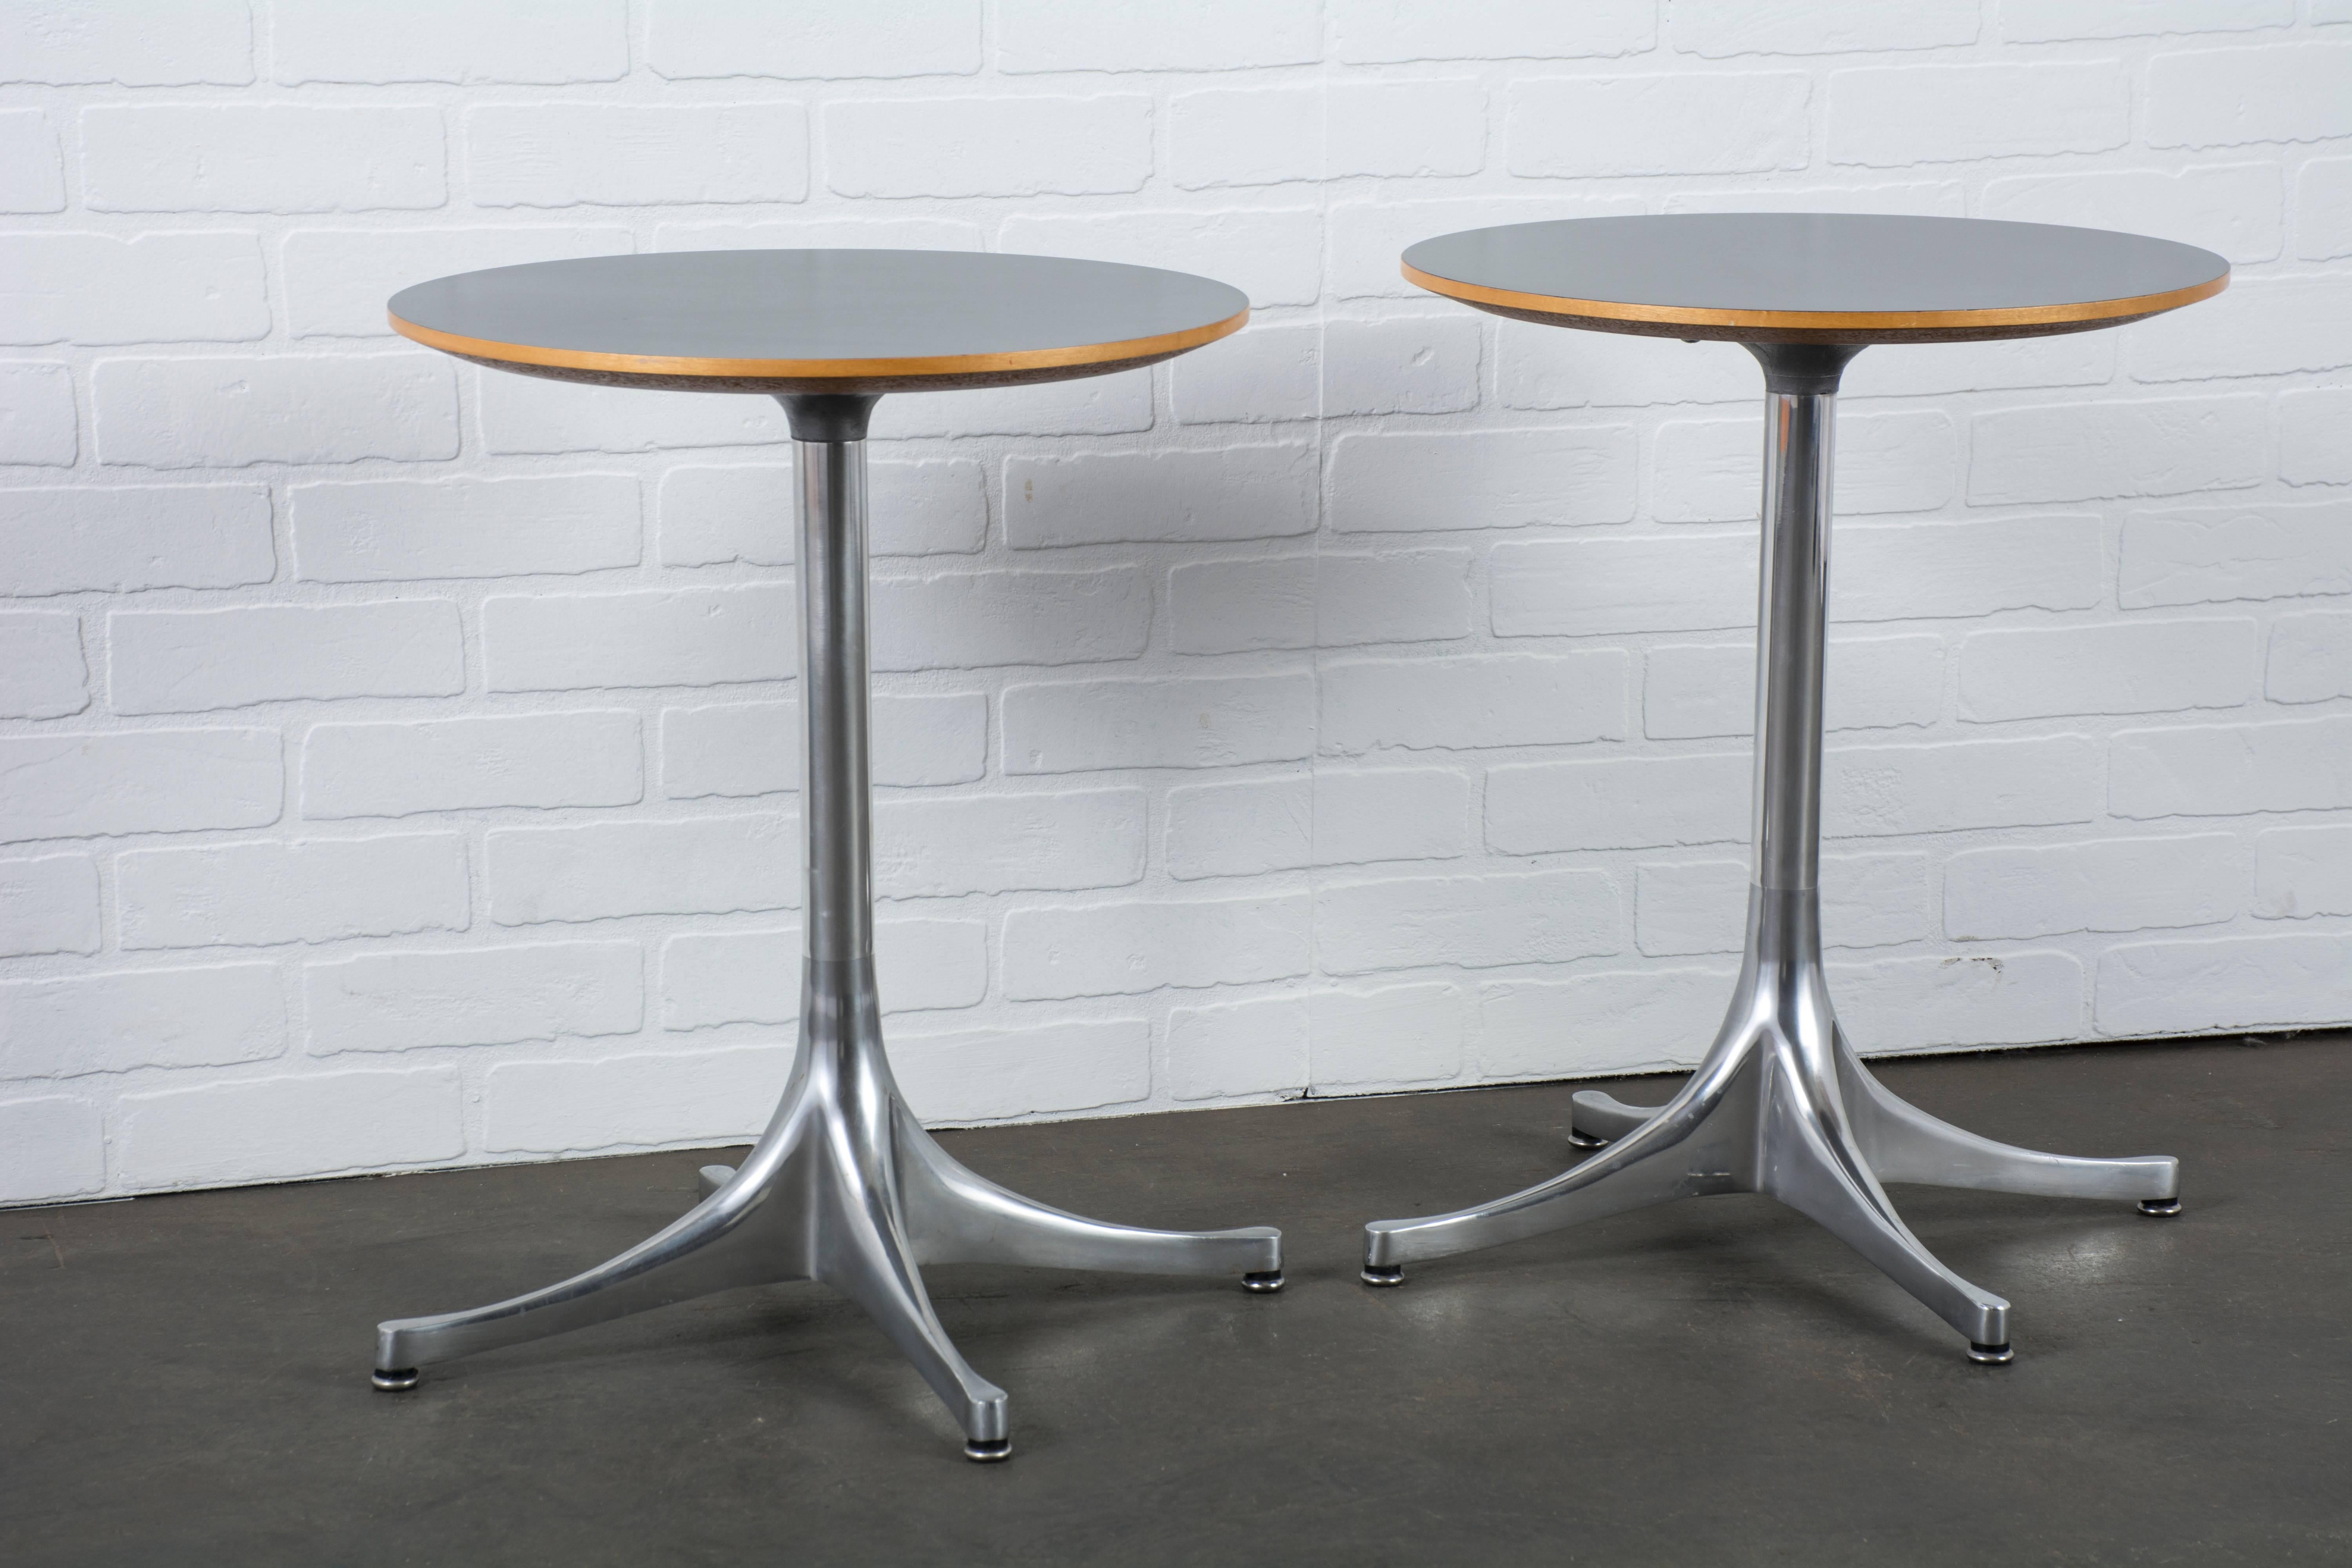 This is a pair of side tables by George Nelson for Herman Miller. The model 5451 end table was designed in 1954 and is still being produced today. They feature polished aluminum bases and black laminate tops with maple veneer edging.